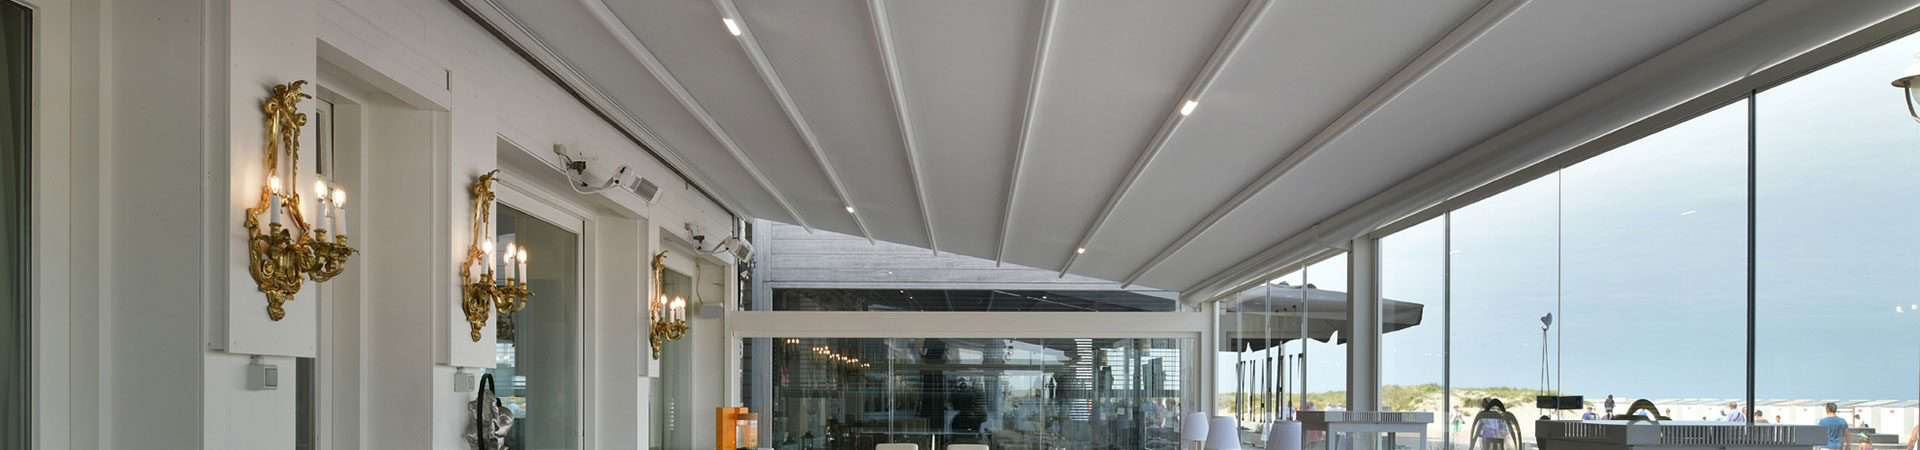 Retractable Awnings Adelaide